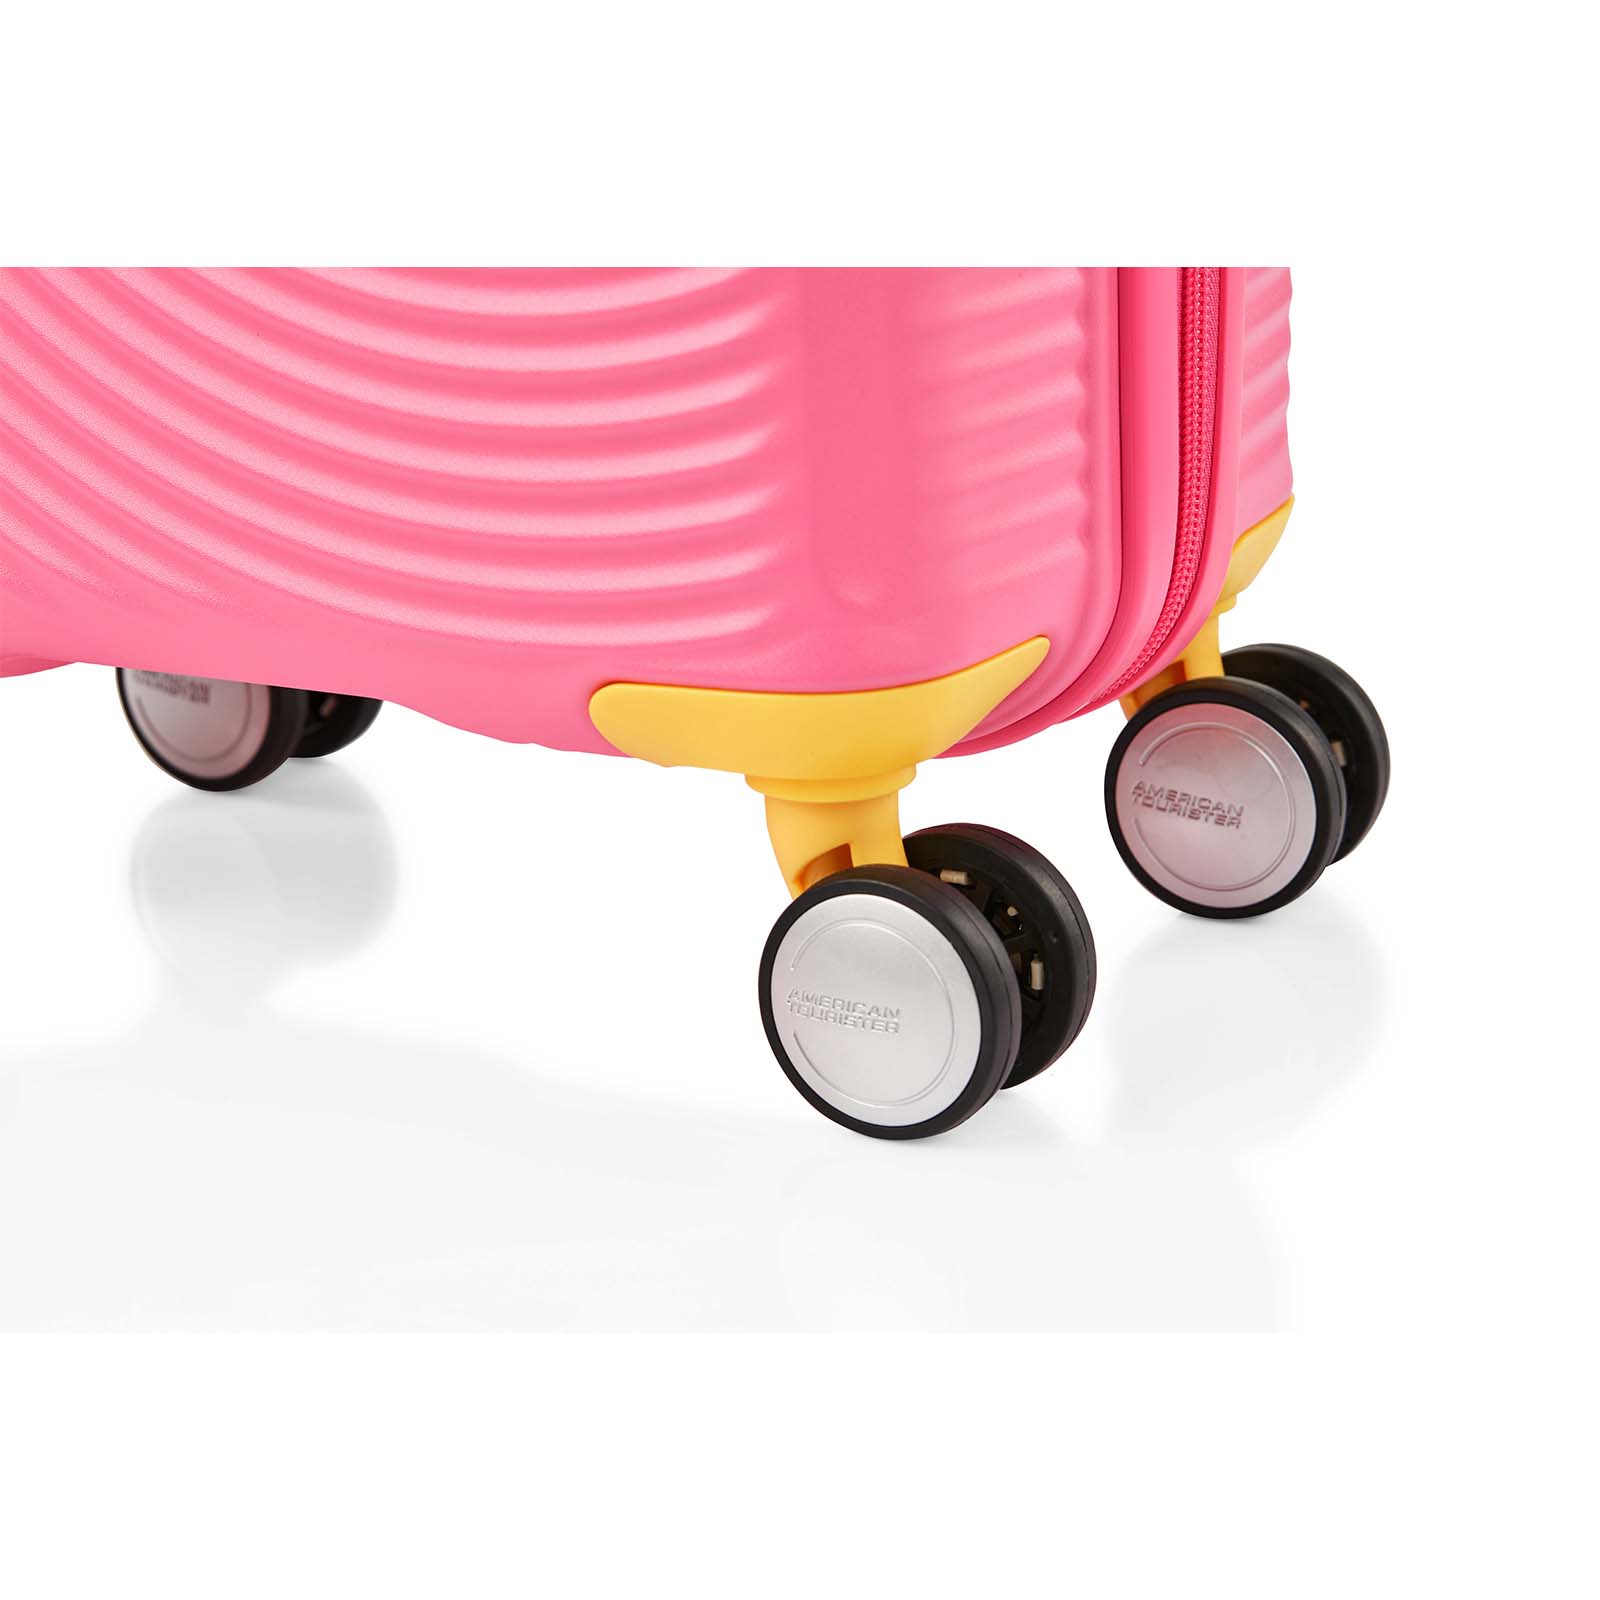 American-Tourister-Little-Curio-47cm-Carry-On-Suitcase-Pink-Yellow-Wheels